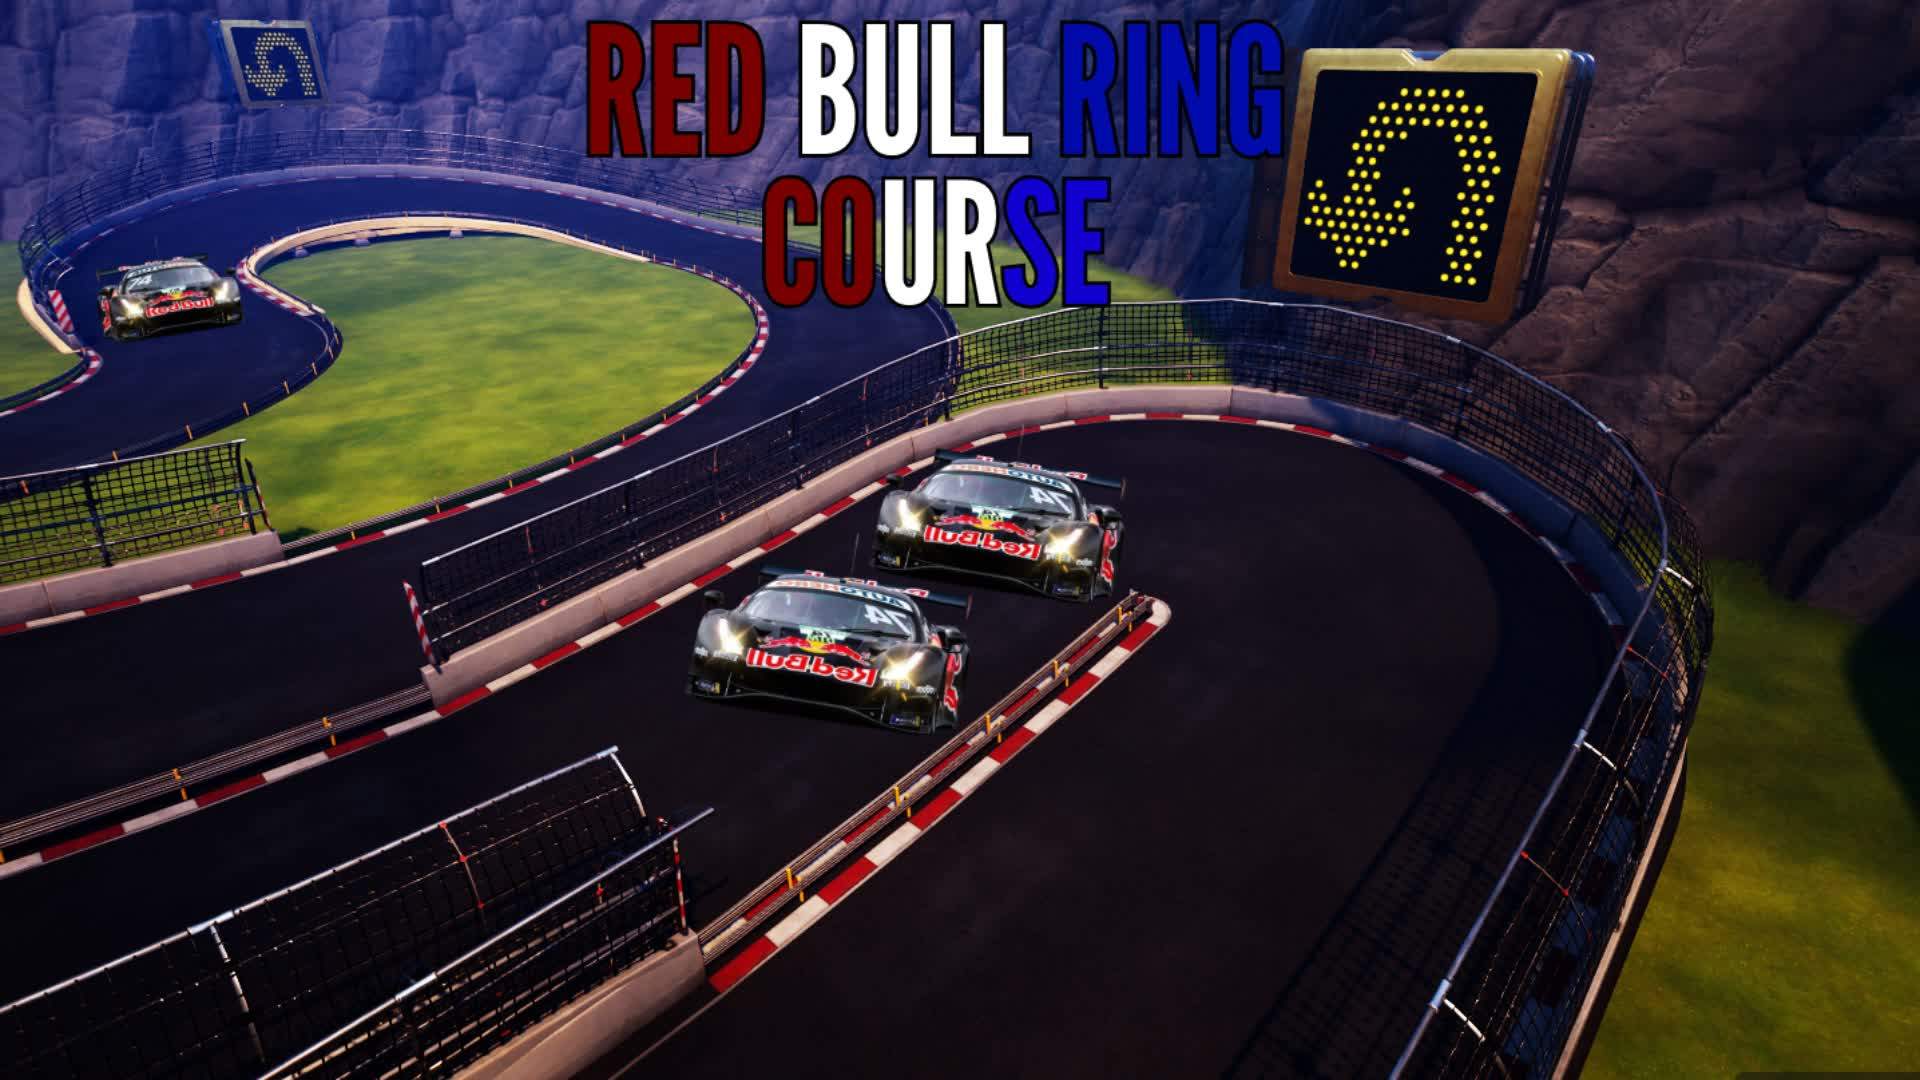 🇦🇹RED BULL RING COURSE🇦🇹